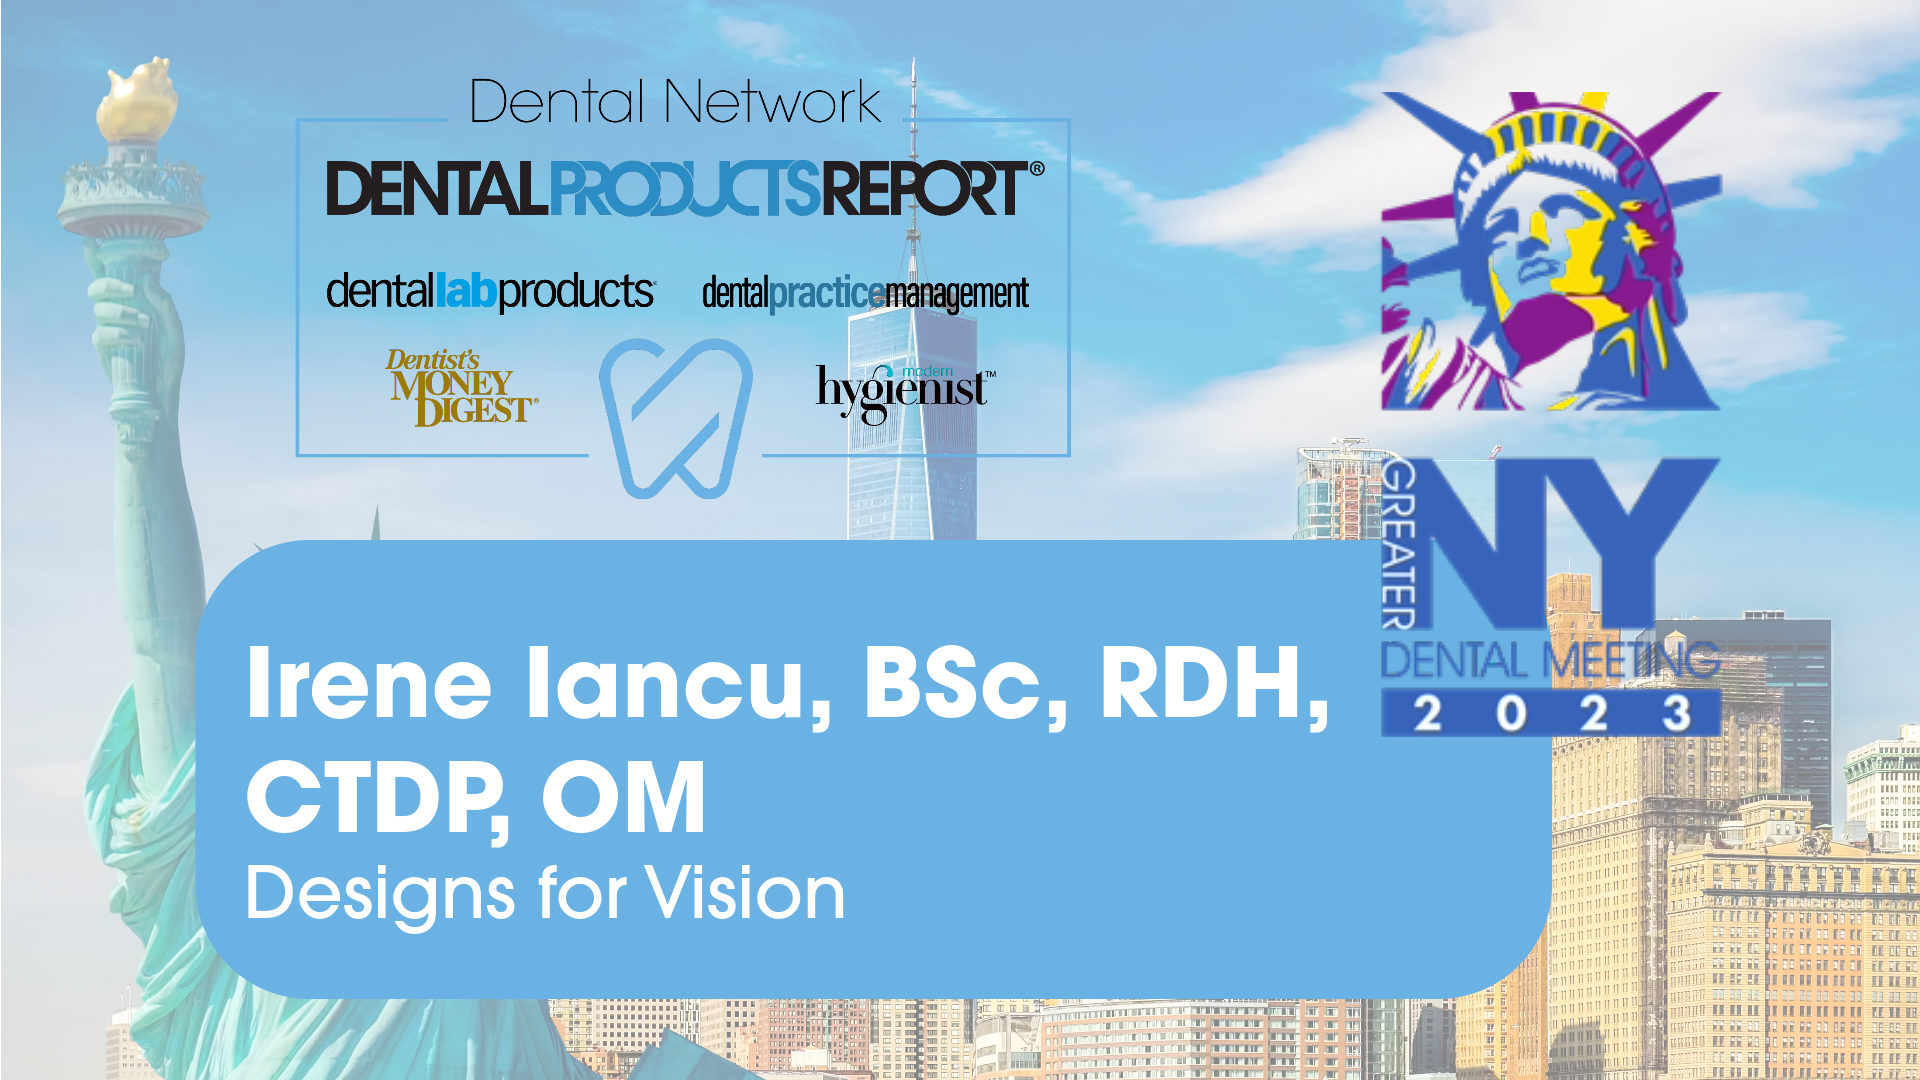 Greater New York Dental Meeting 2023 - Interview with Irene Iancu, BSc, RDH, CTDP, OM